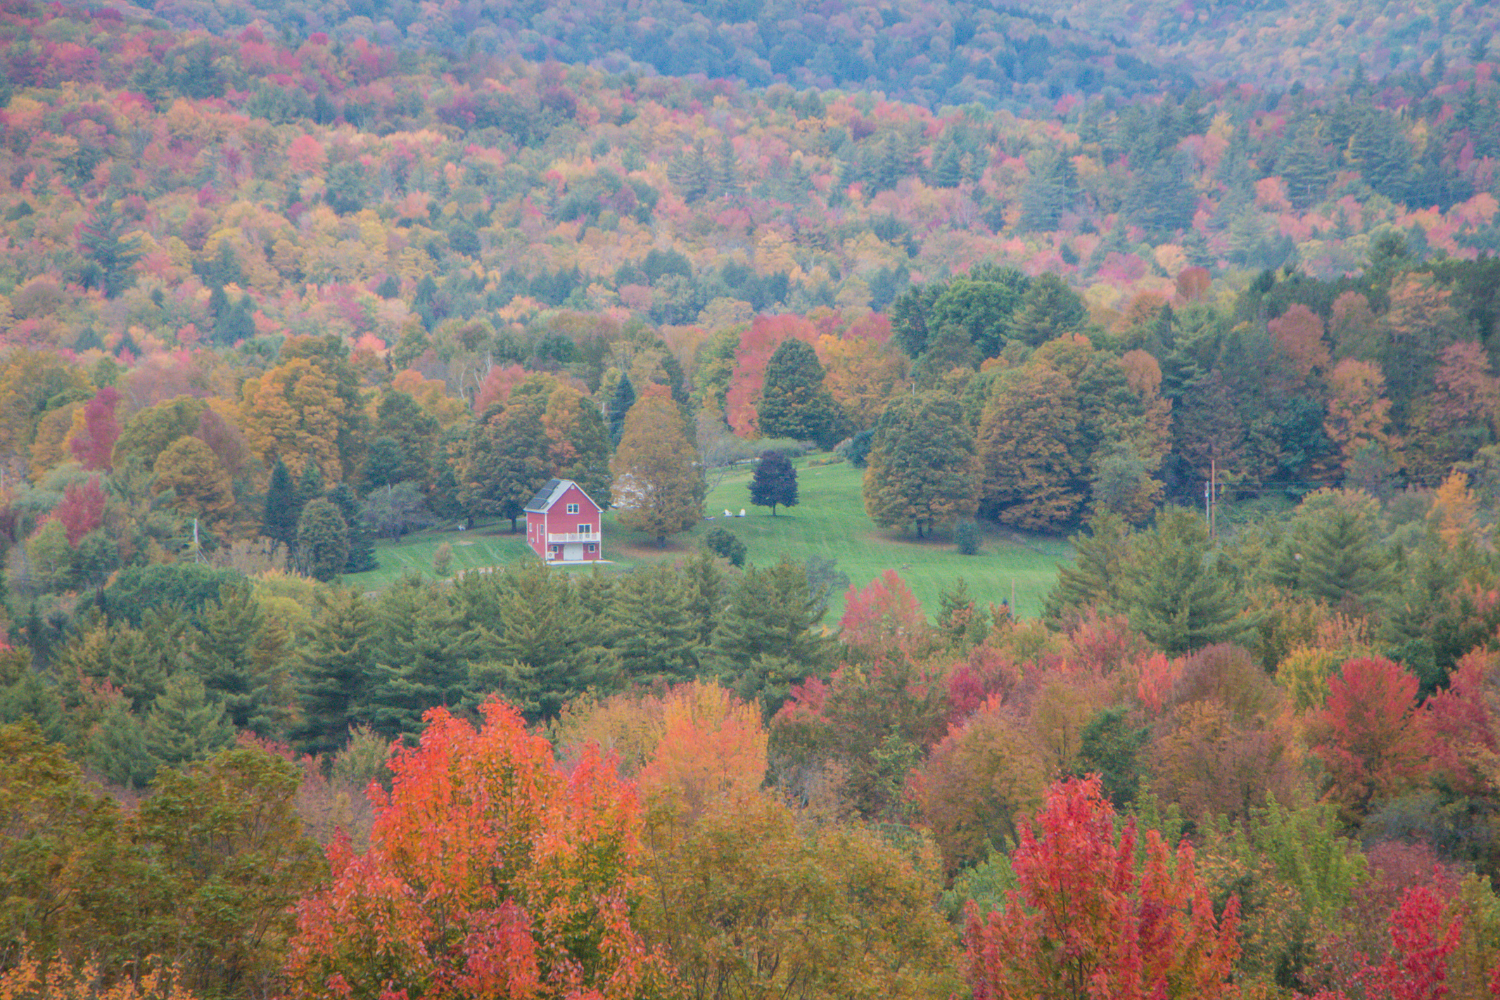 Red building in a clearing among colorful foliage